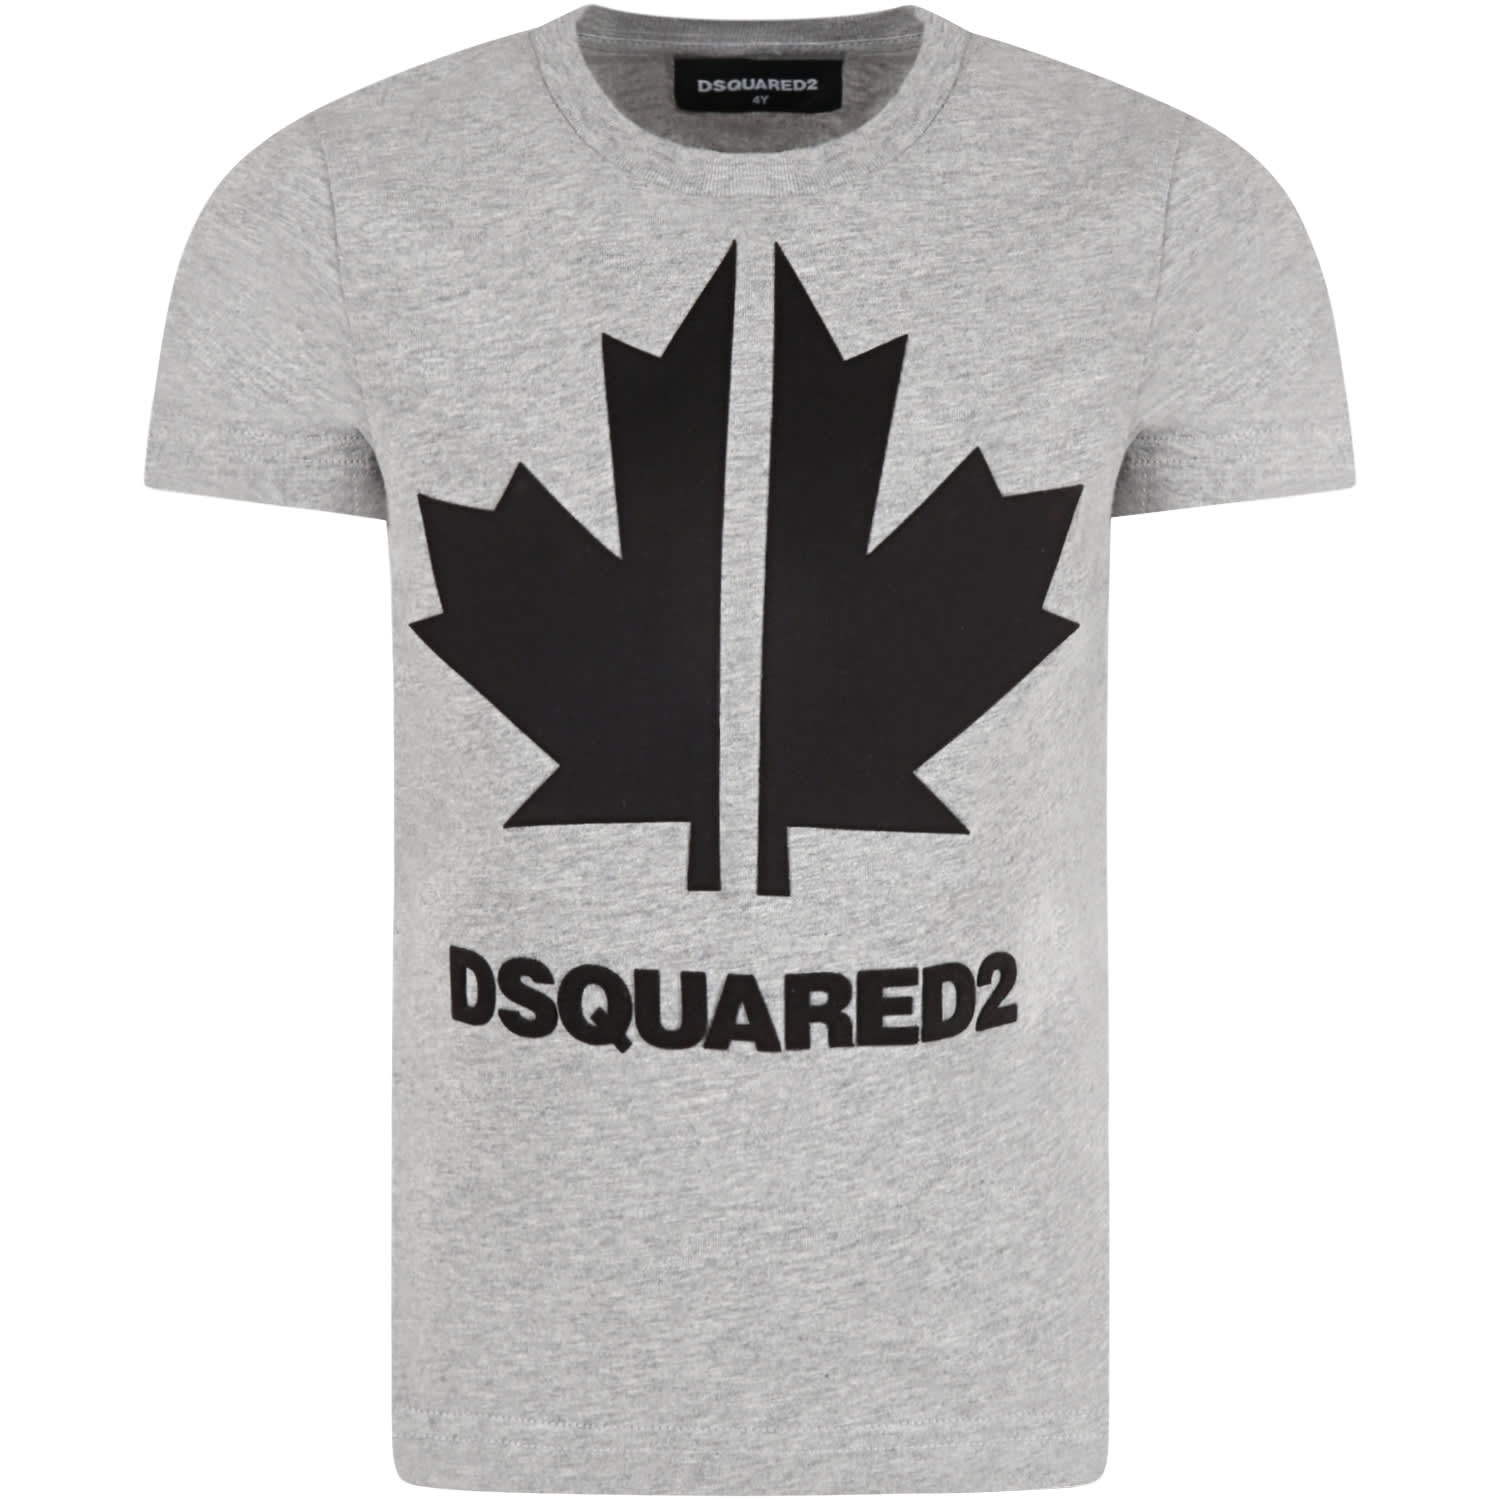 Dsquared2 Grey T-shirt For Boy With Maple Leaf